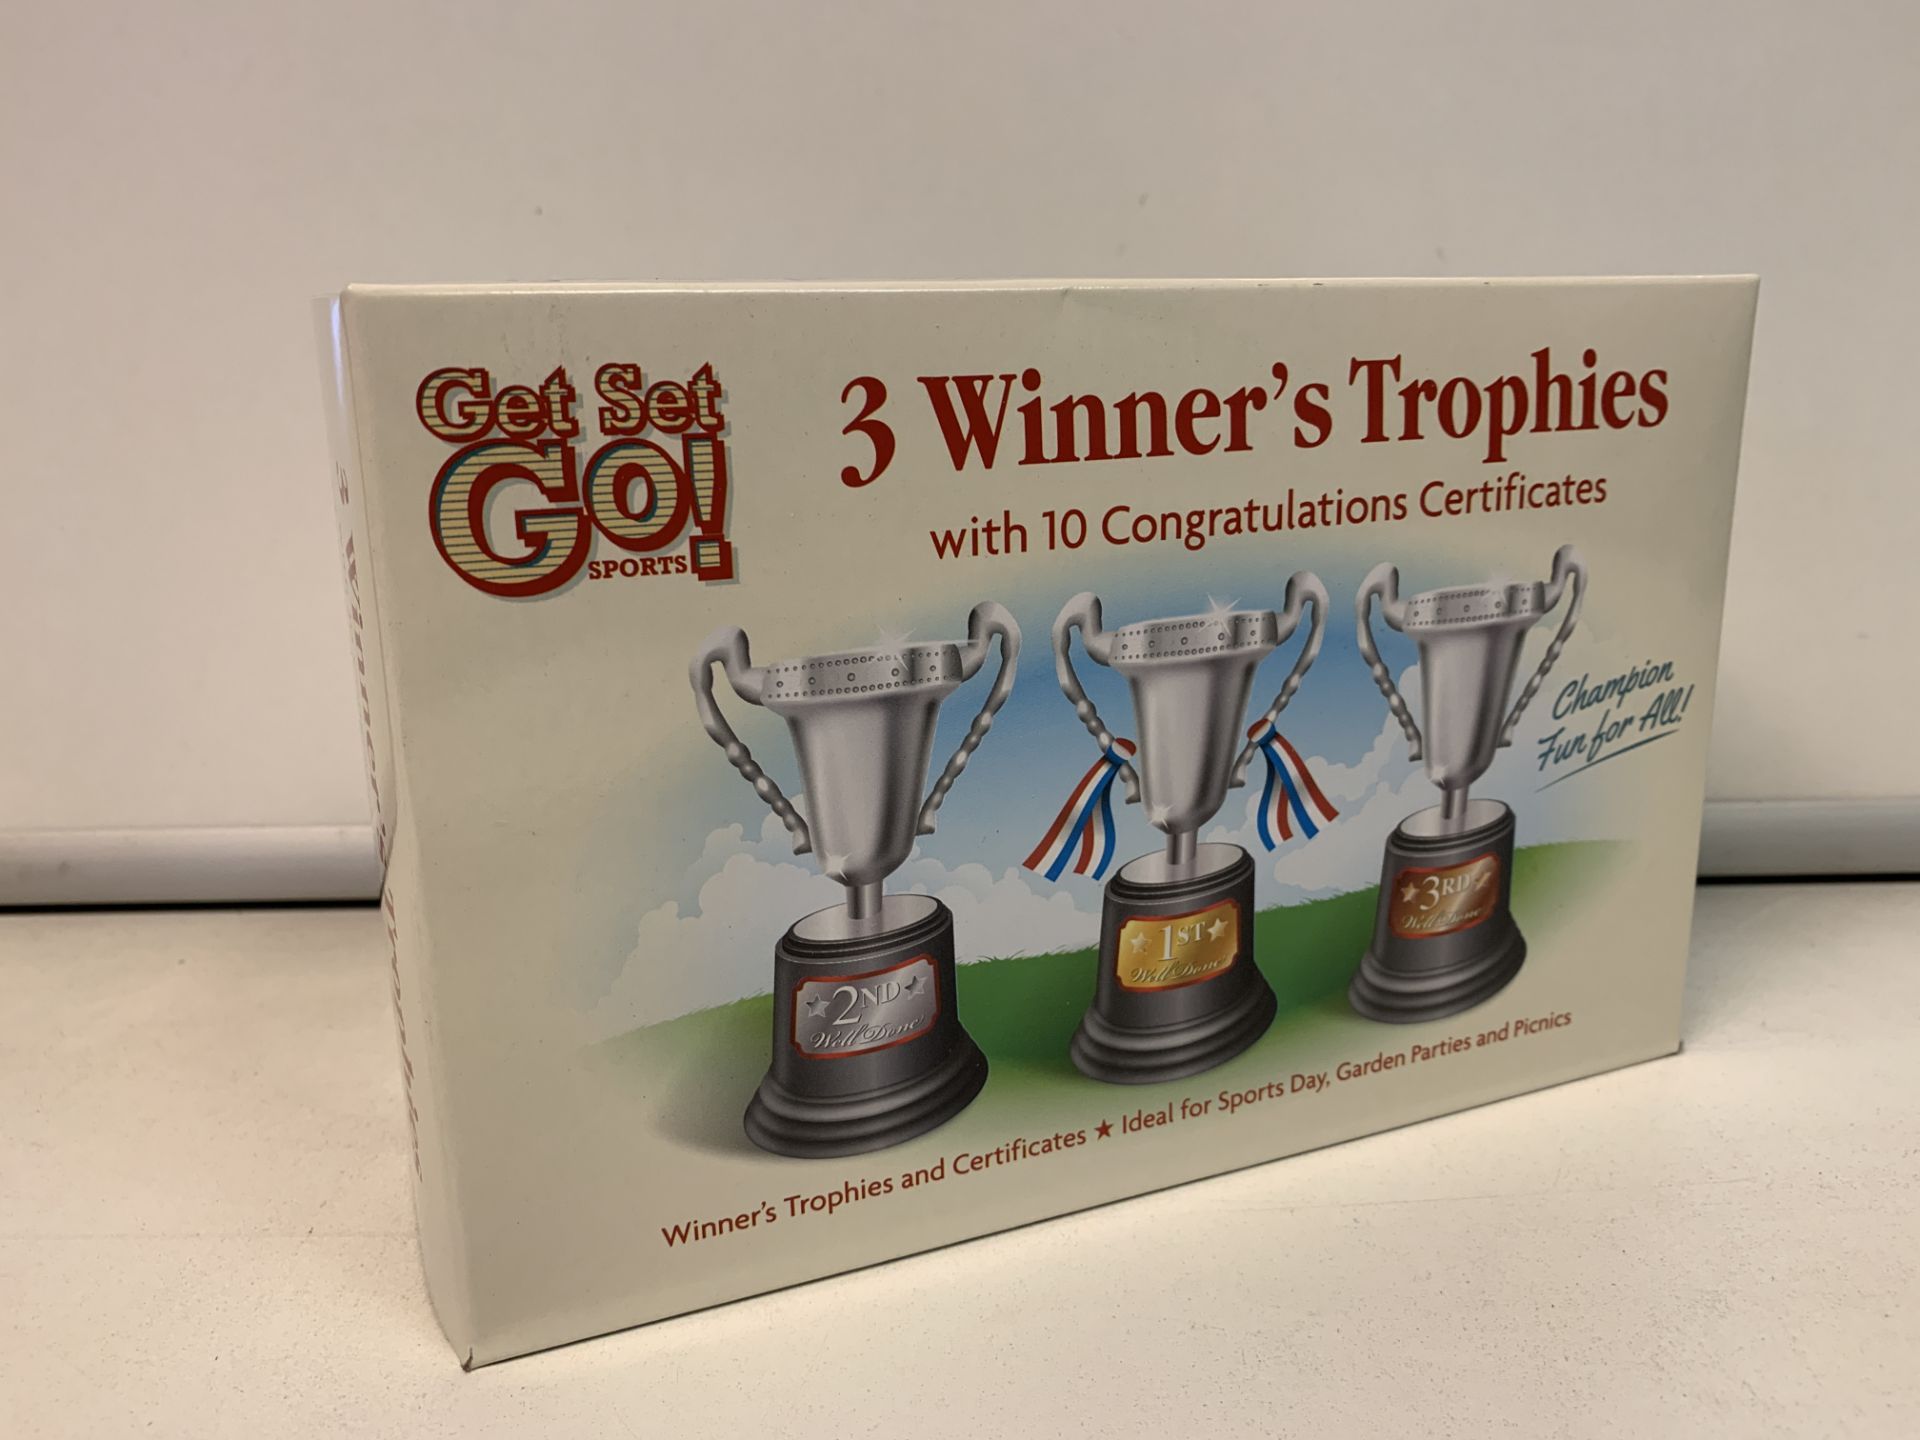 48 X BRAND NEW GET SET GO 3 WINNERS TROPHIES KITS WITH 10 CONGRATULATIONS CERTIFICATES R9